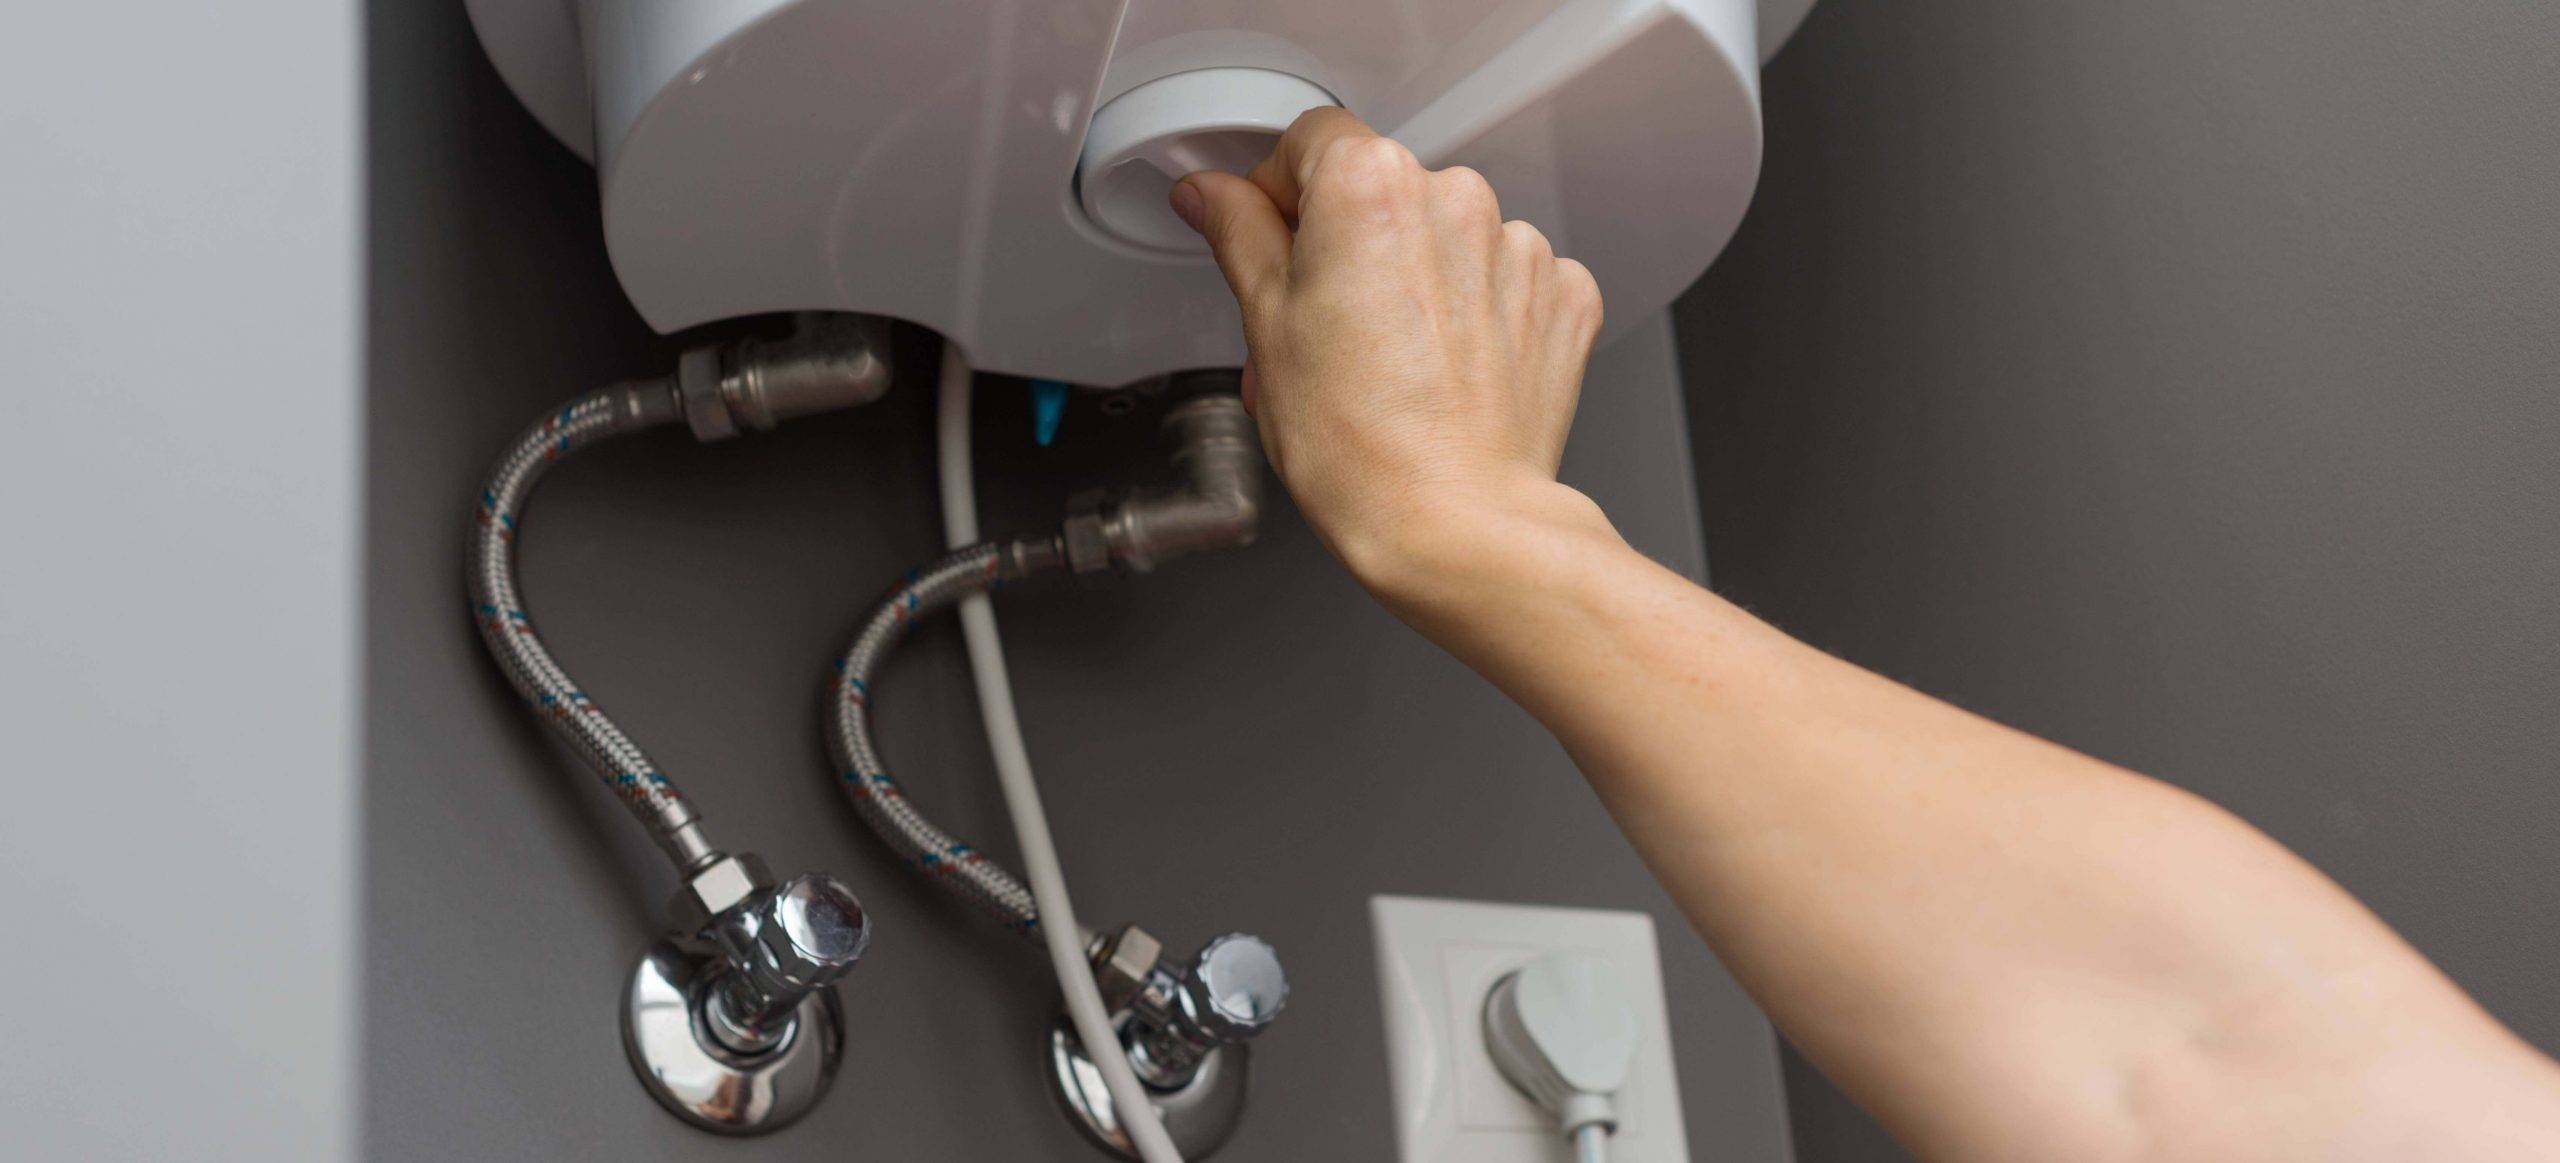 Should You Turn Off Your Water Heater When You Go On Vacation?